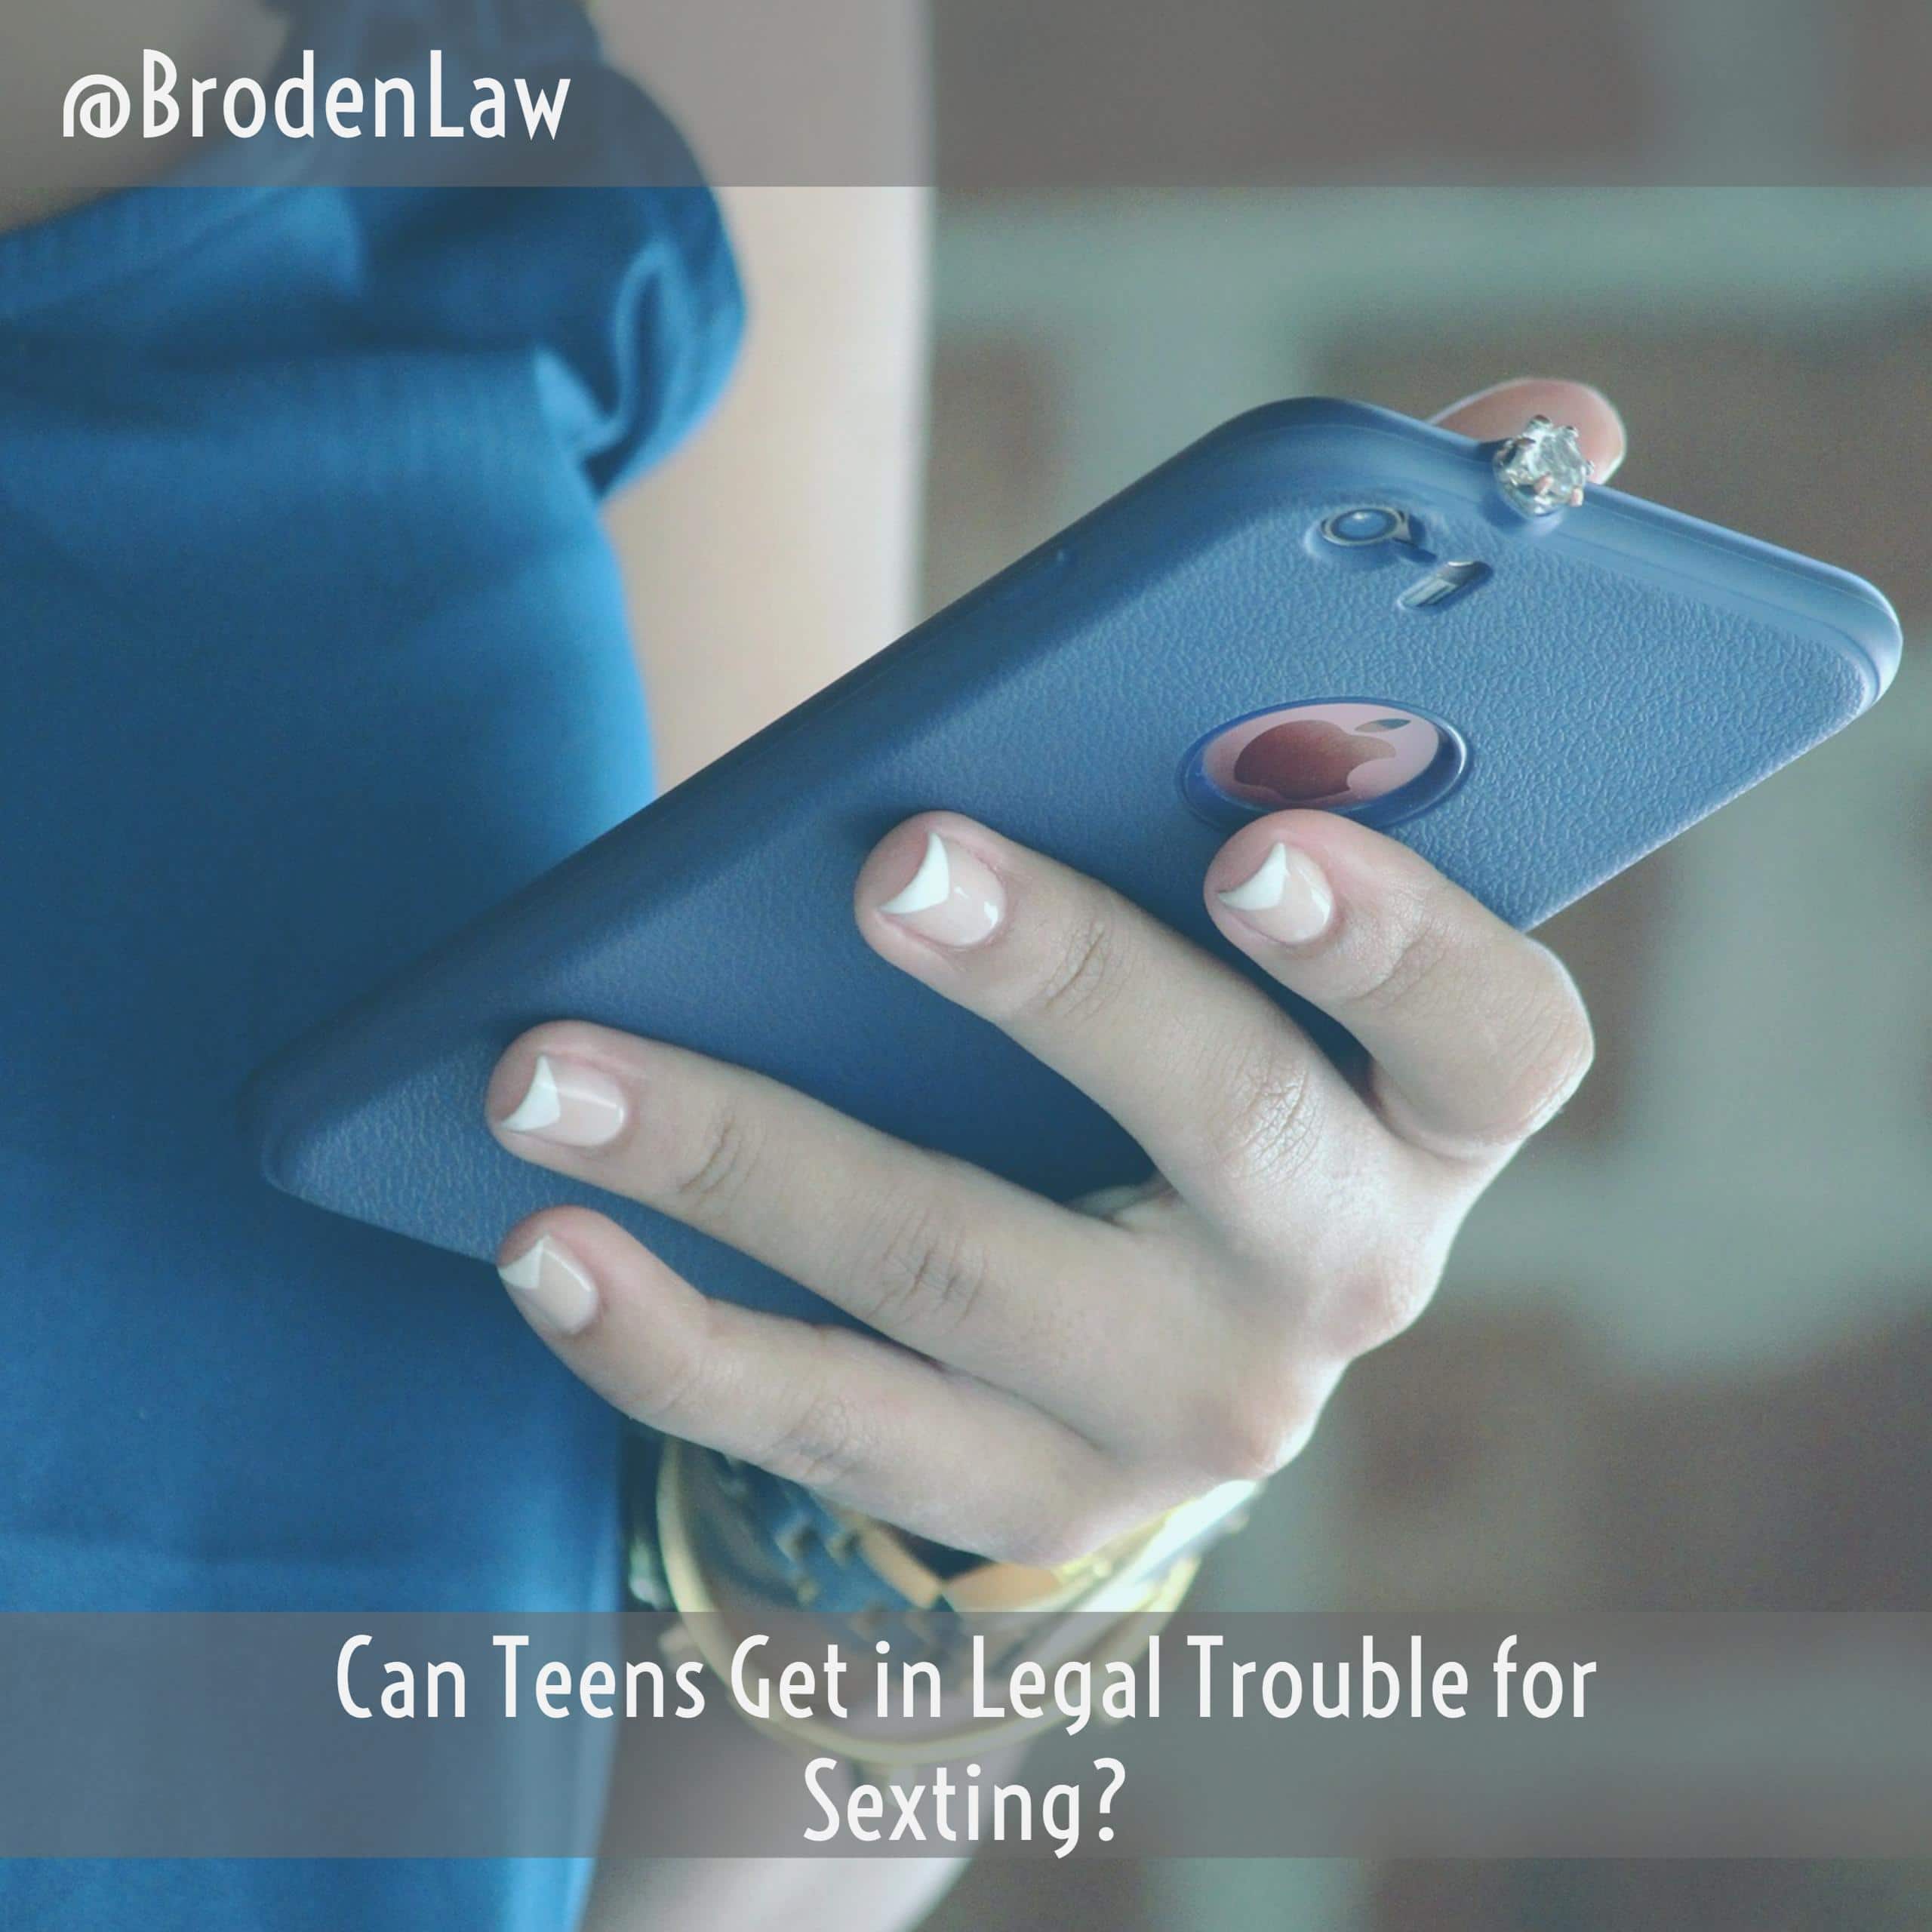 Can Teens Get in Legal Trouble for Sexting